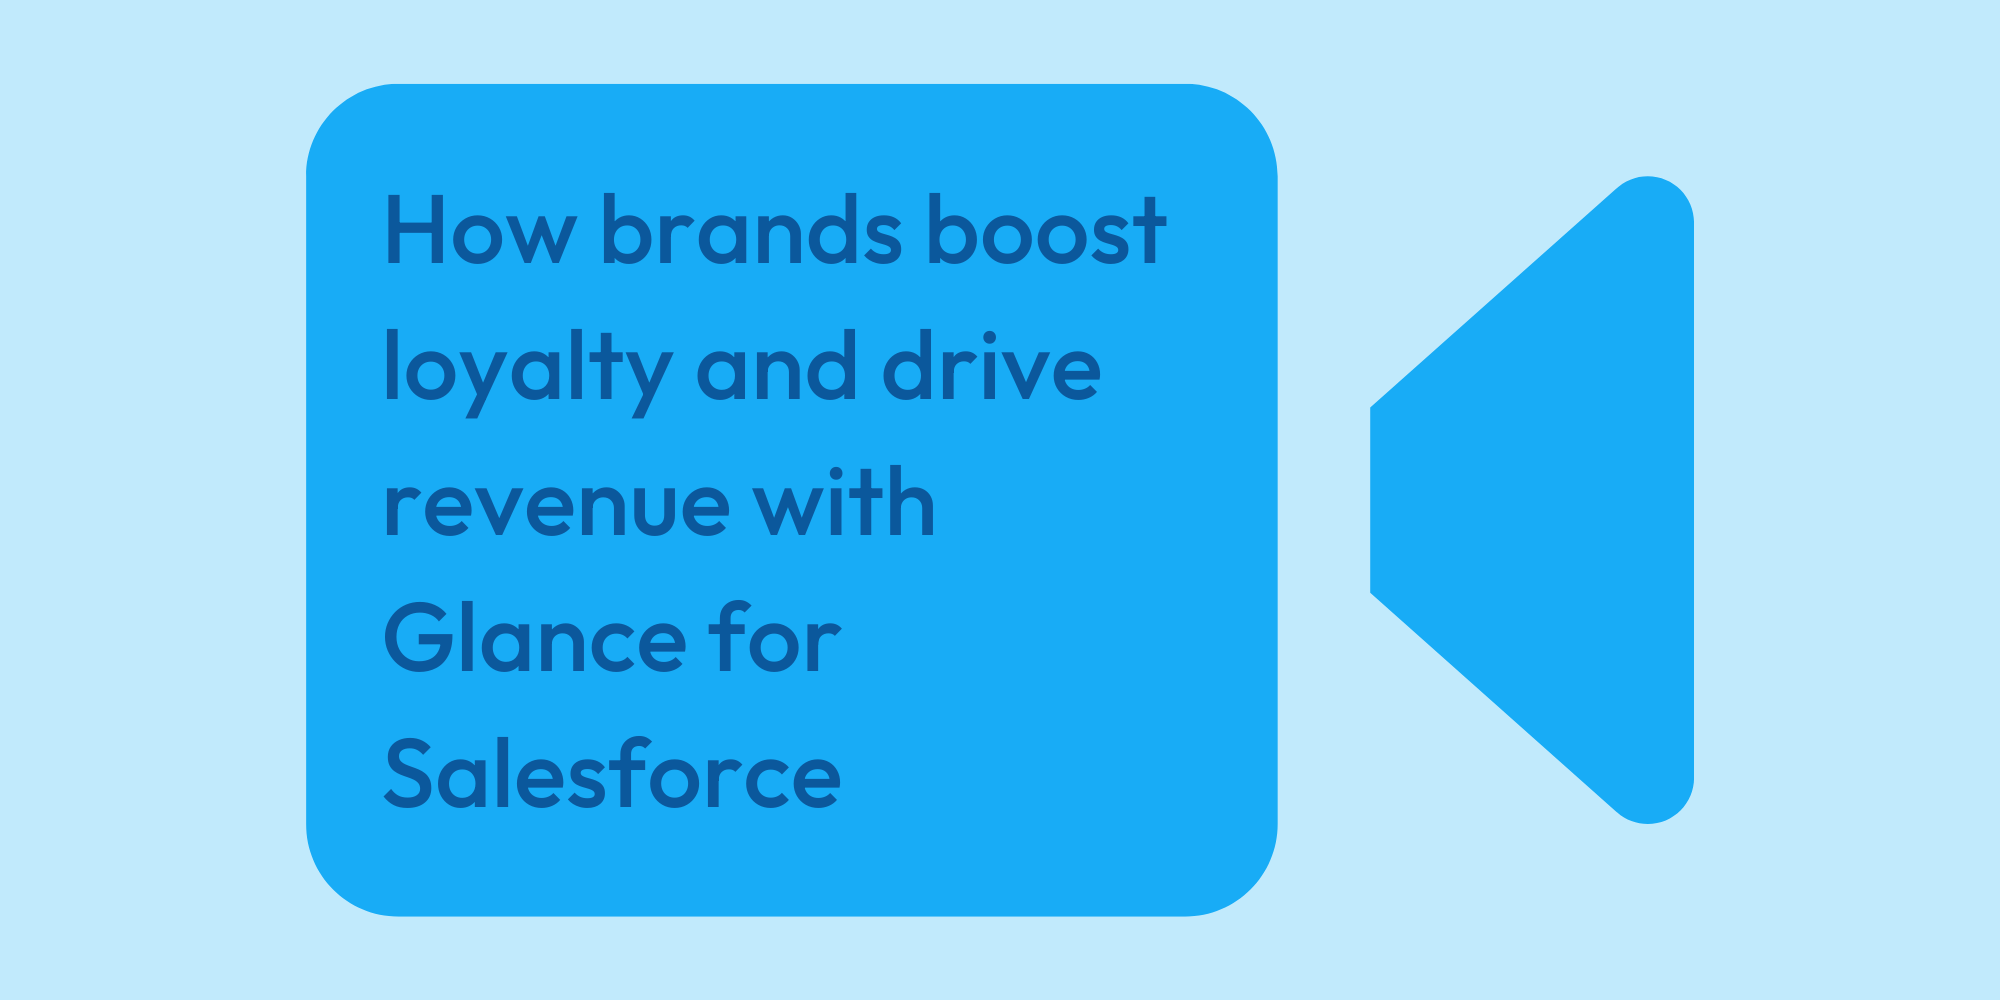 How brands boost loyalty and drive revenue with Glance for Salesforce